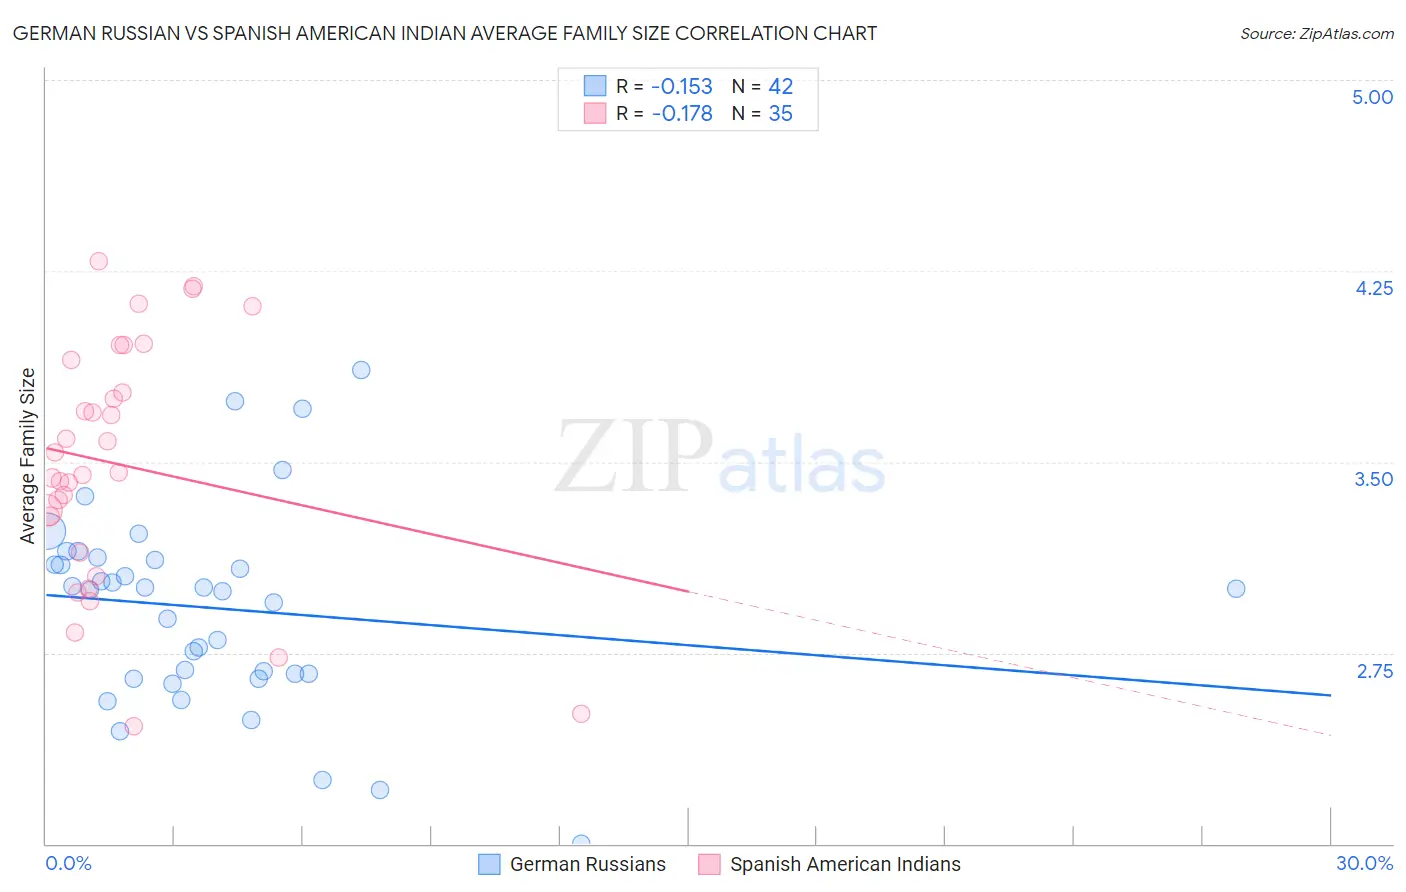 German Russian vs Spanish American Indian Average Family Size